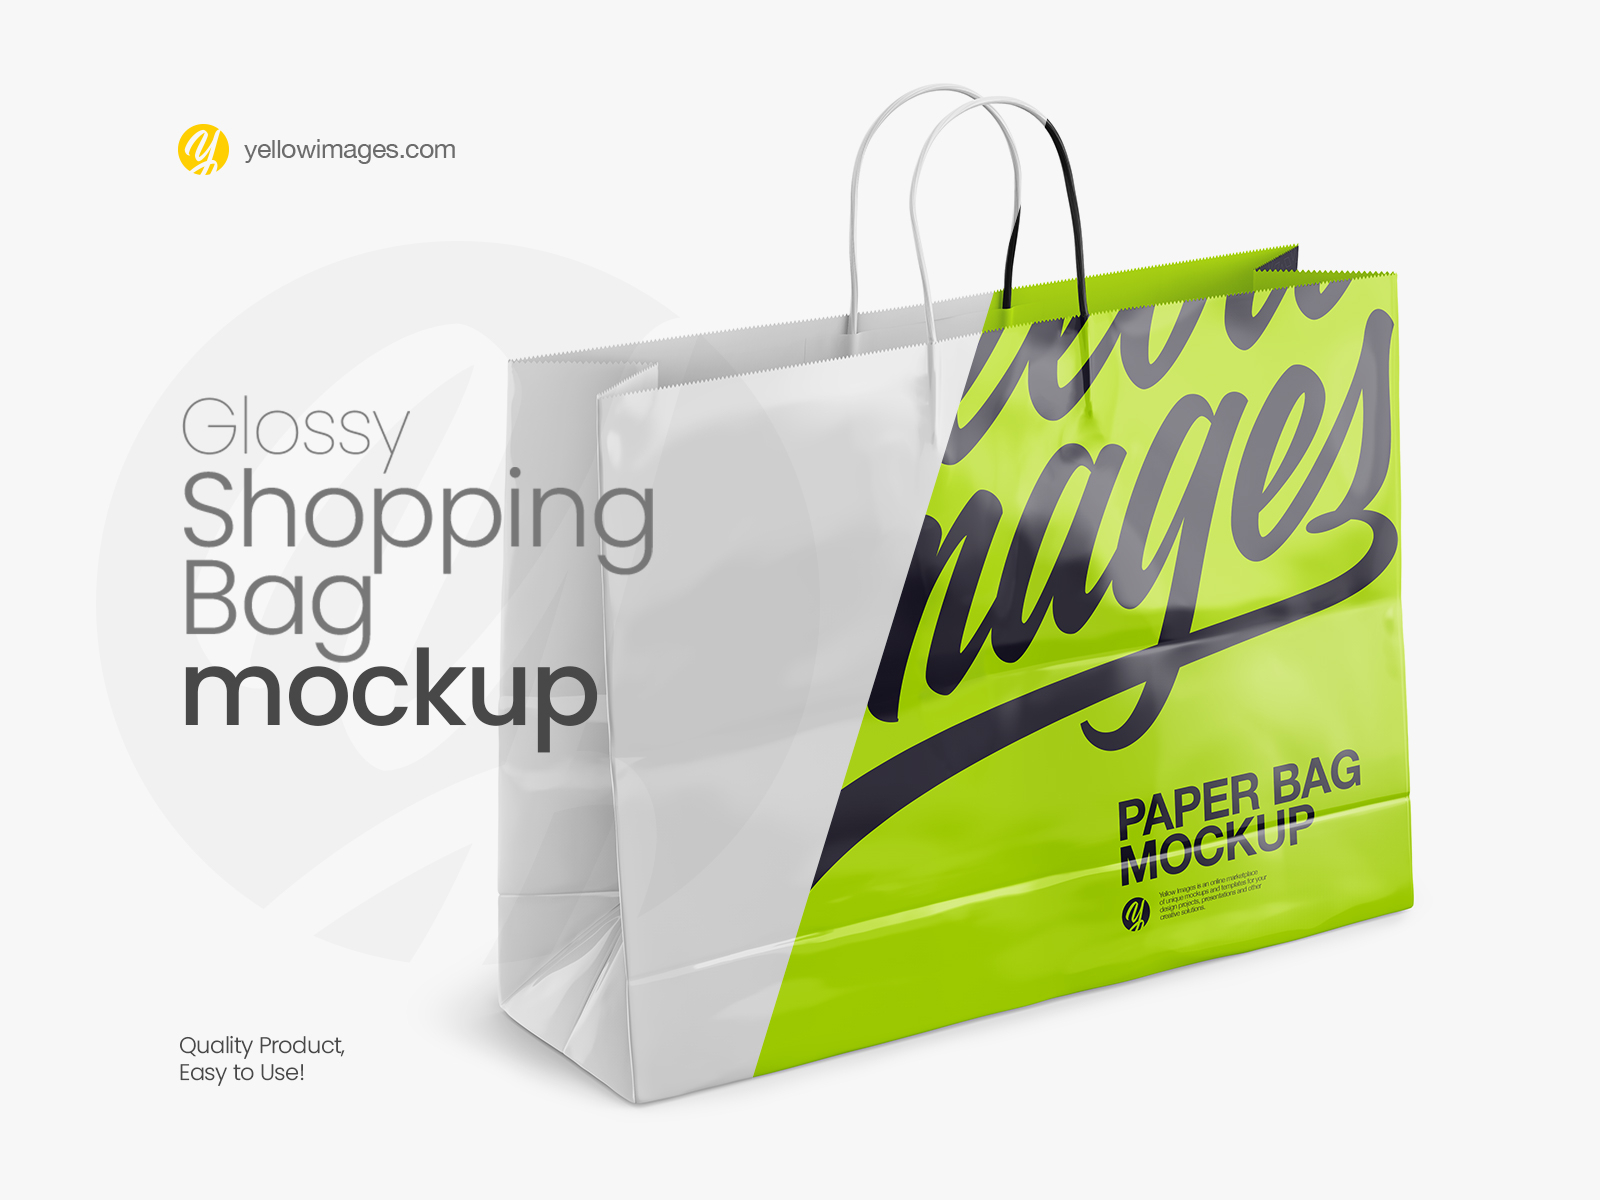 Download Packaging Logo Mockup Download Free And Premium Psd Mockup Templates And Design Assets Yellowimages Mockups